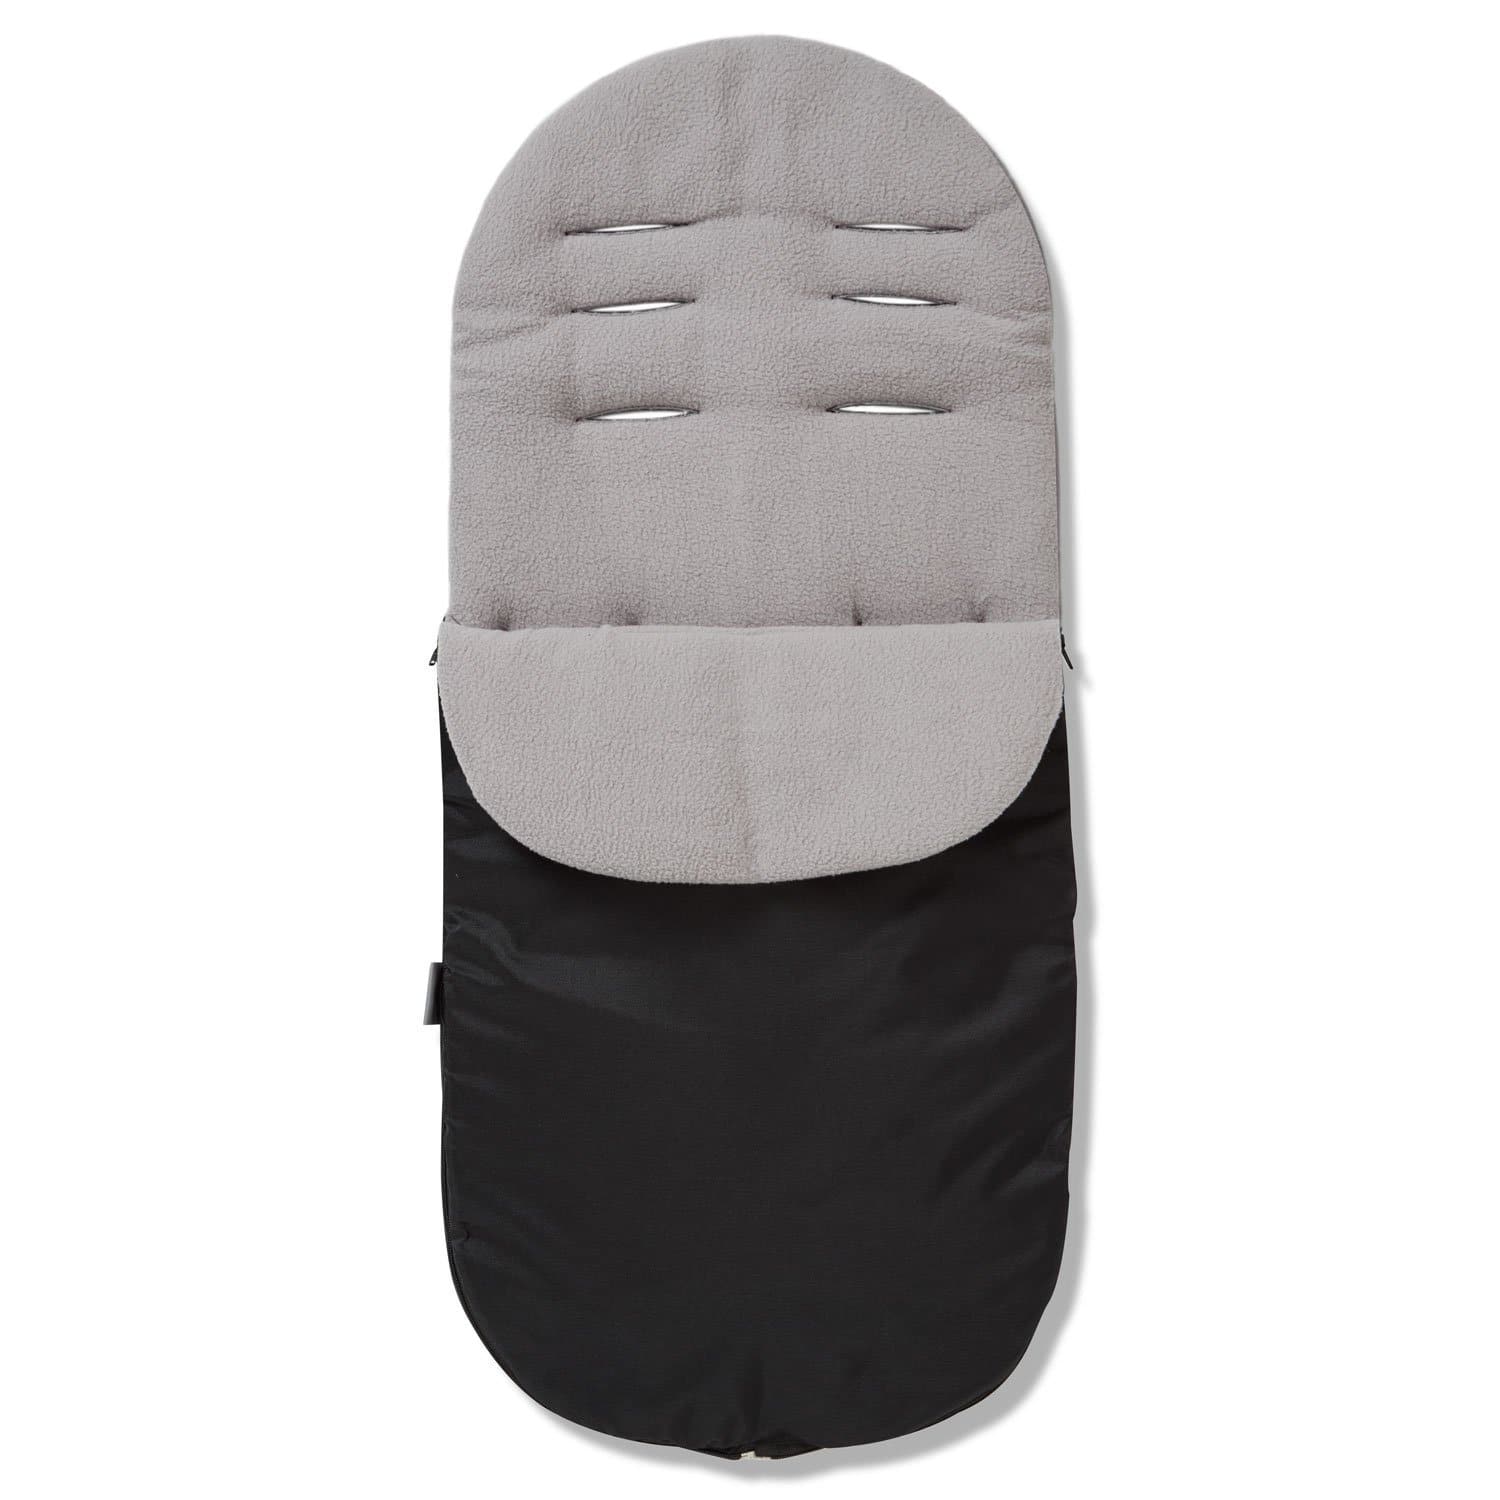 Footmuff / Cosy Toes Compatible with Babylo - For Your Little One